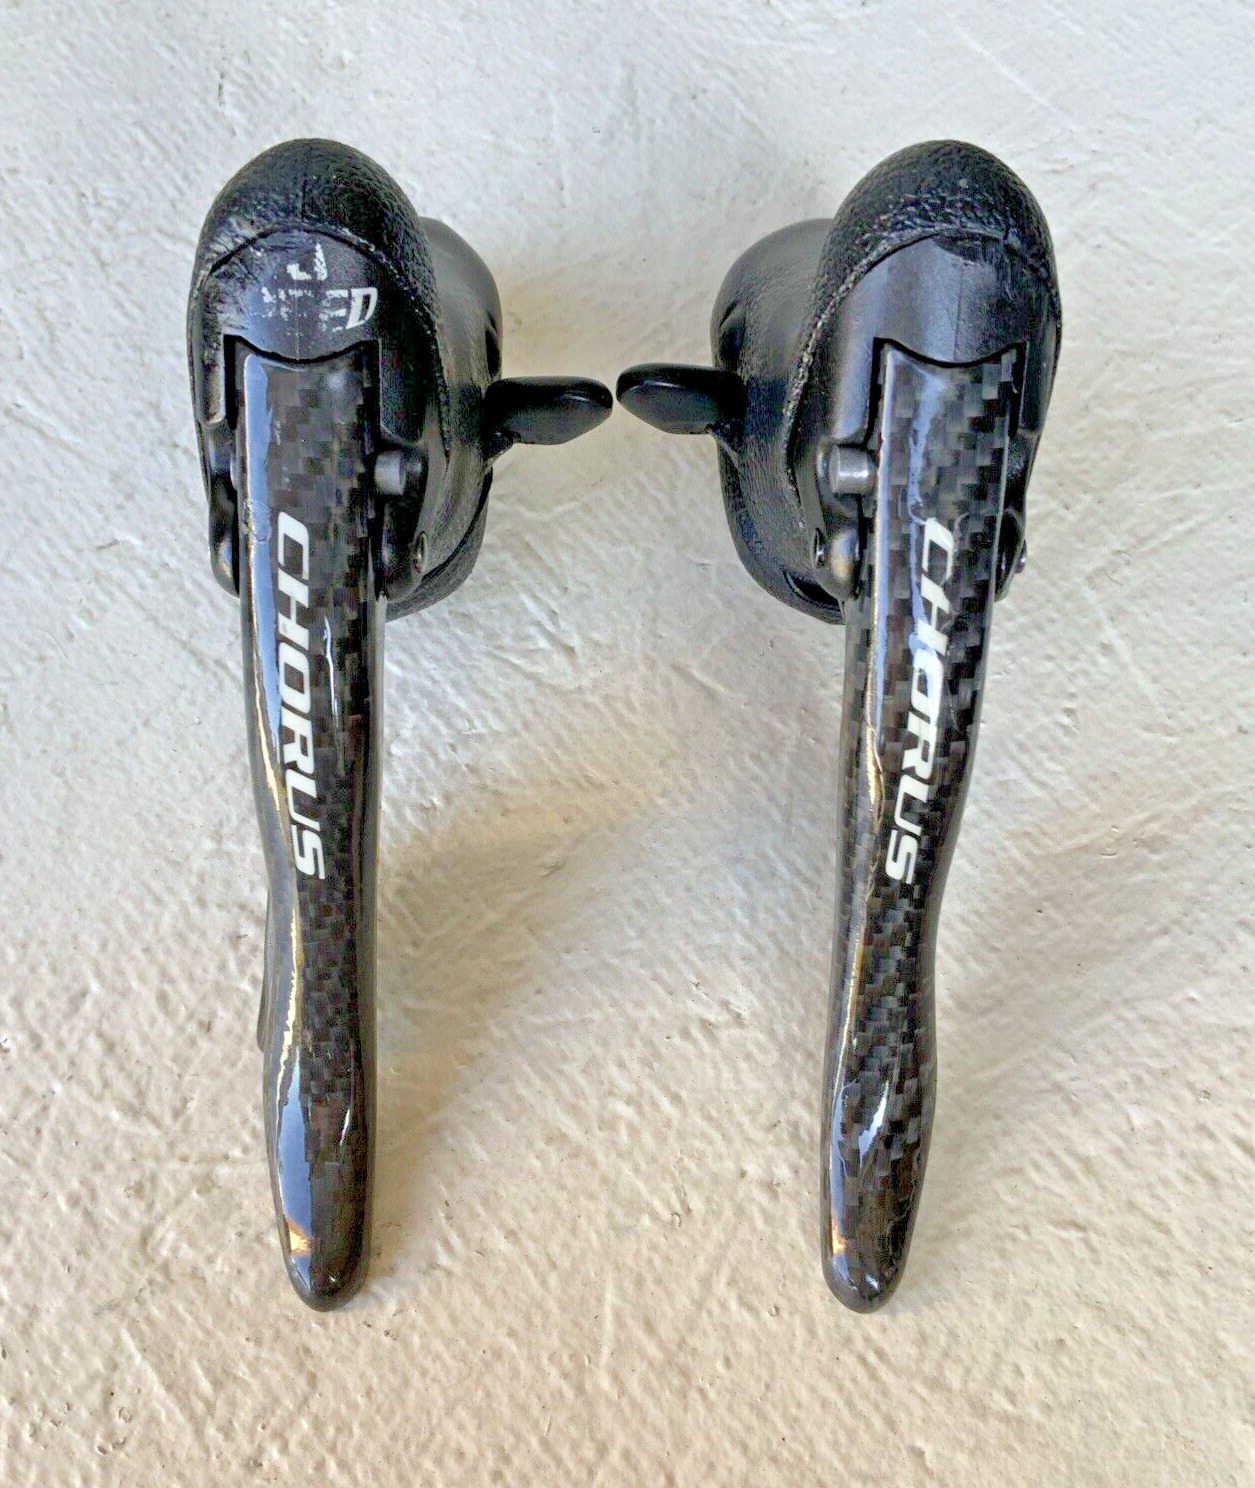 CAMPAGNOLO CHORUS BRAKE / SHIFTER SET 10 SPEED DOUBLE OR TRIPLE ERGO CARBON